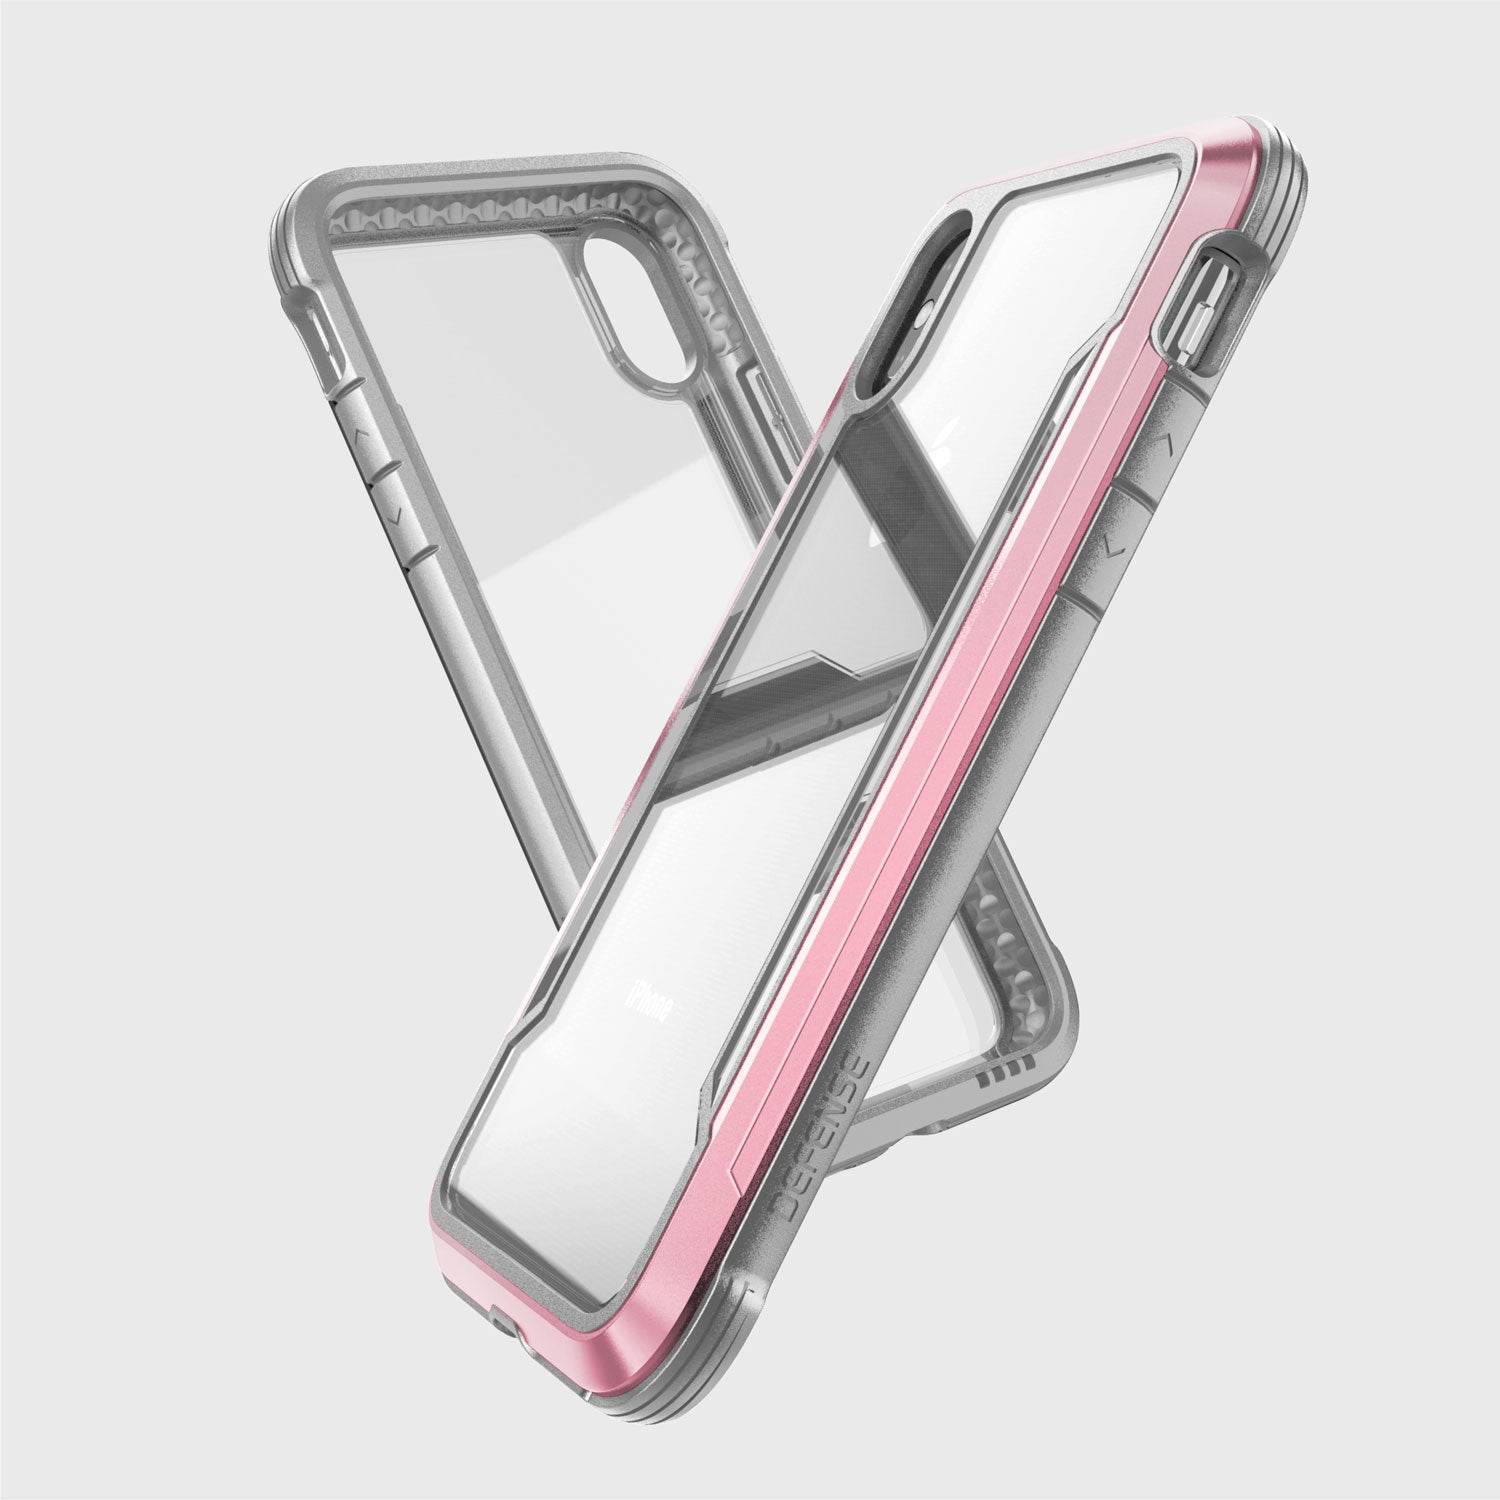 A pink and clear Raptic SHIELD case for the iPhone XR, offering drop protection.